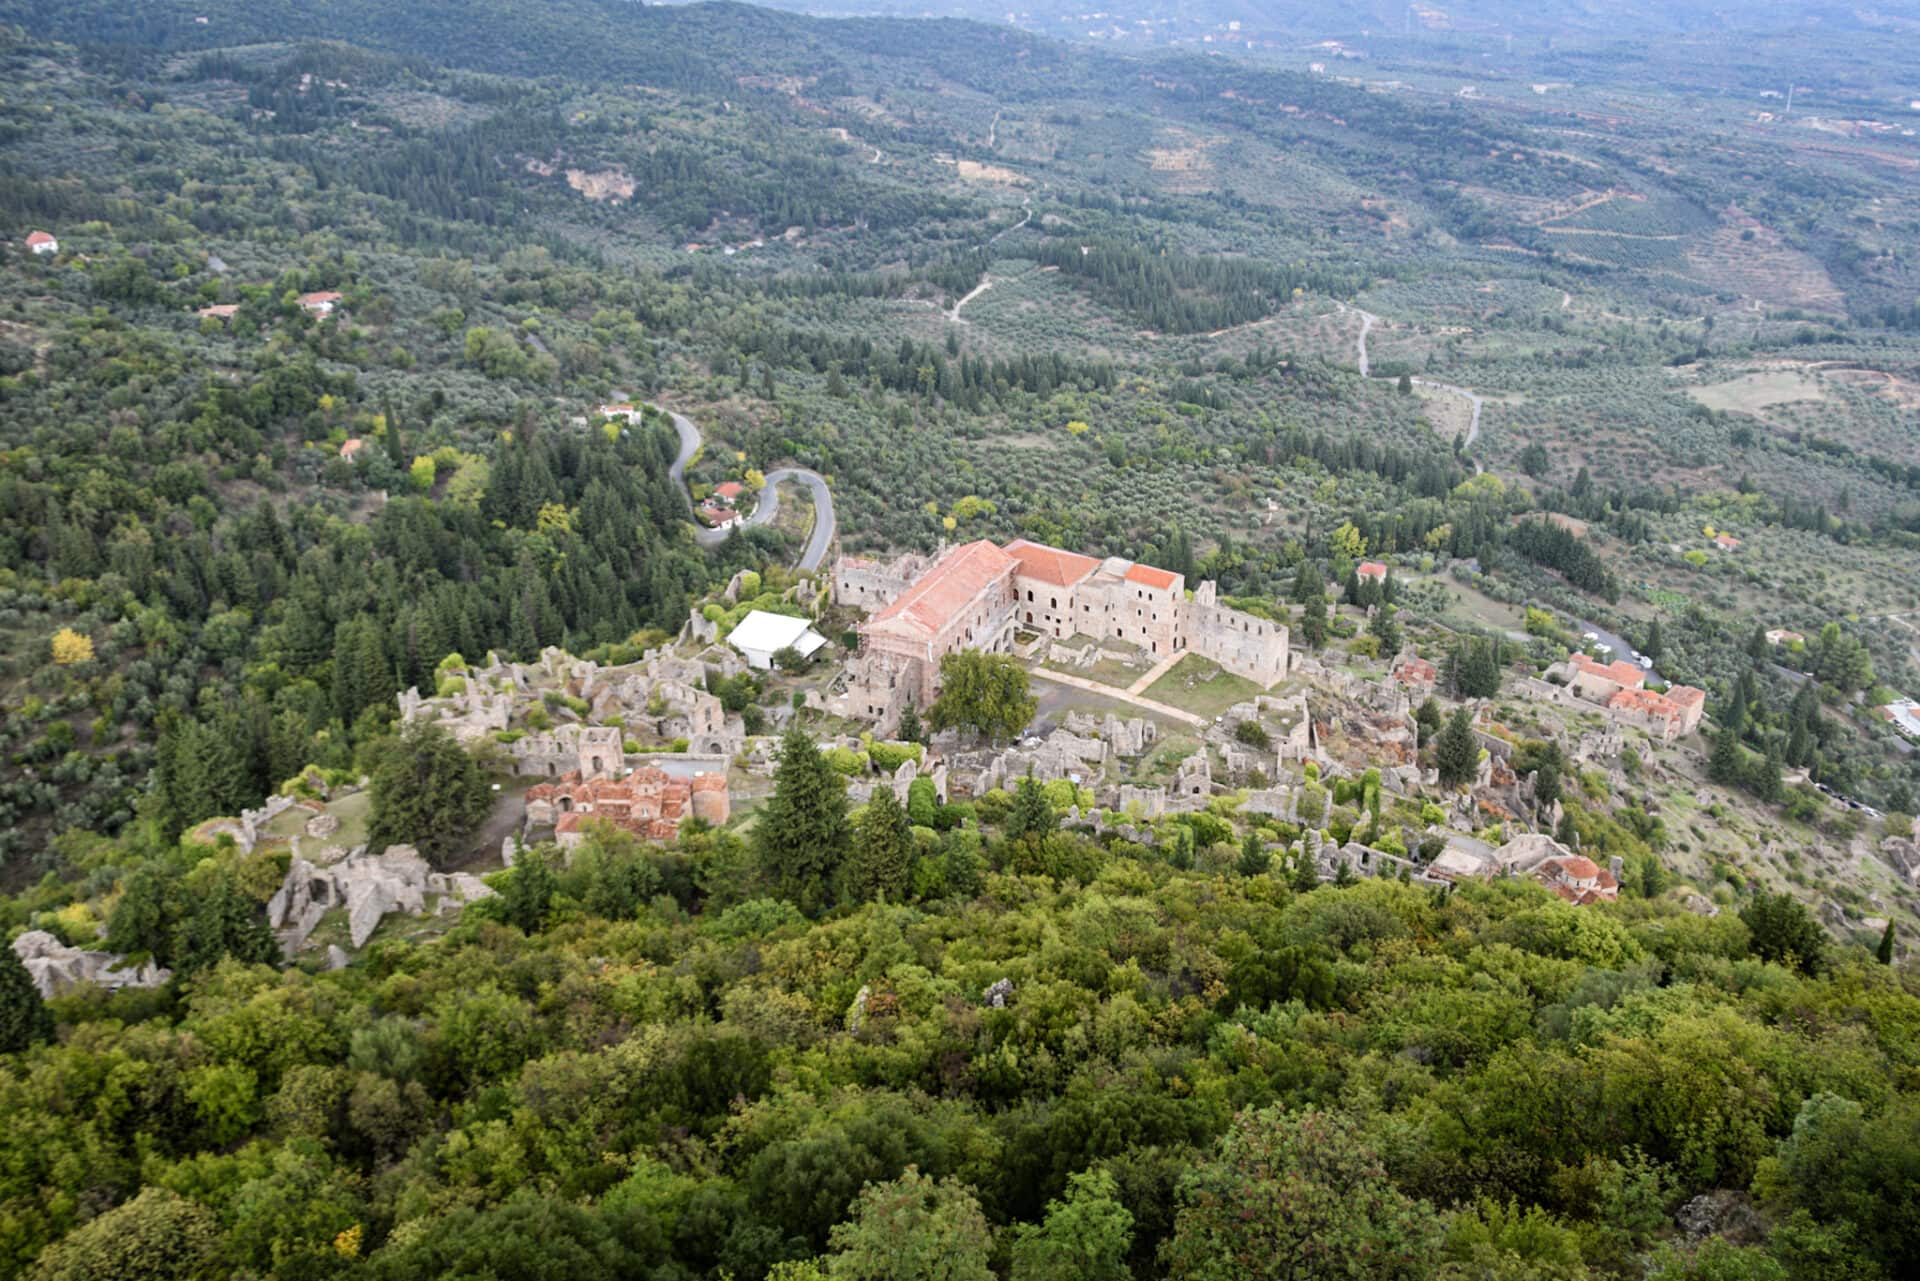 a palace and several other ruined buildings hug the forested slopes of a hill overlooking a fertile plain covered in olive groves